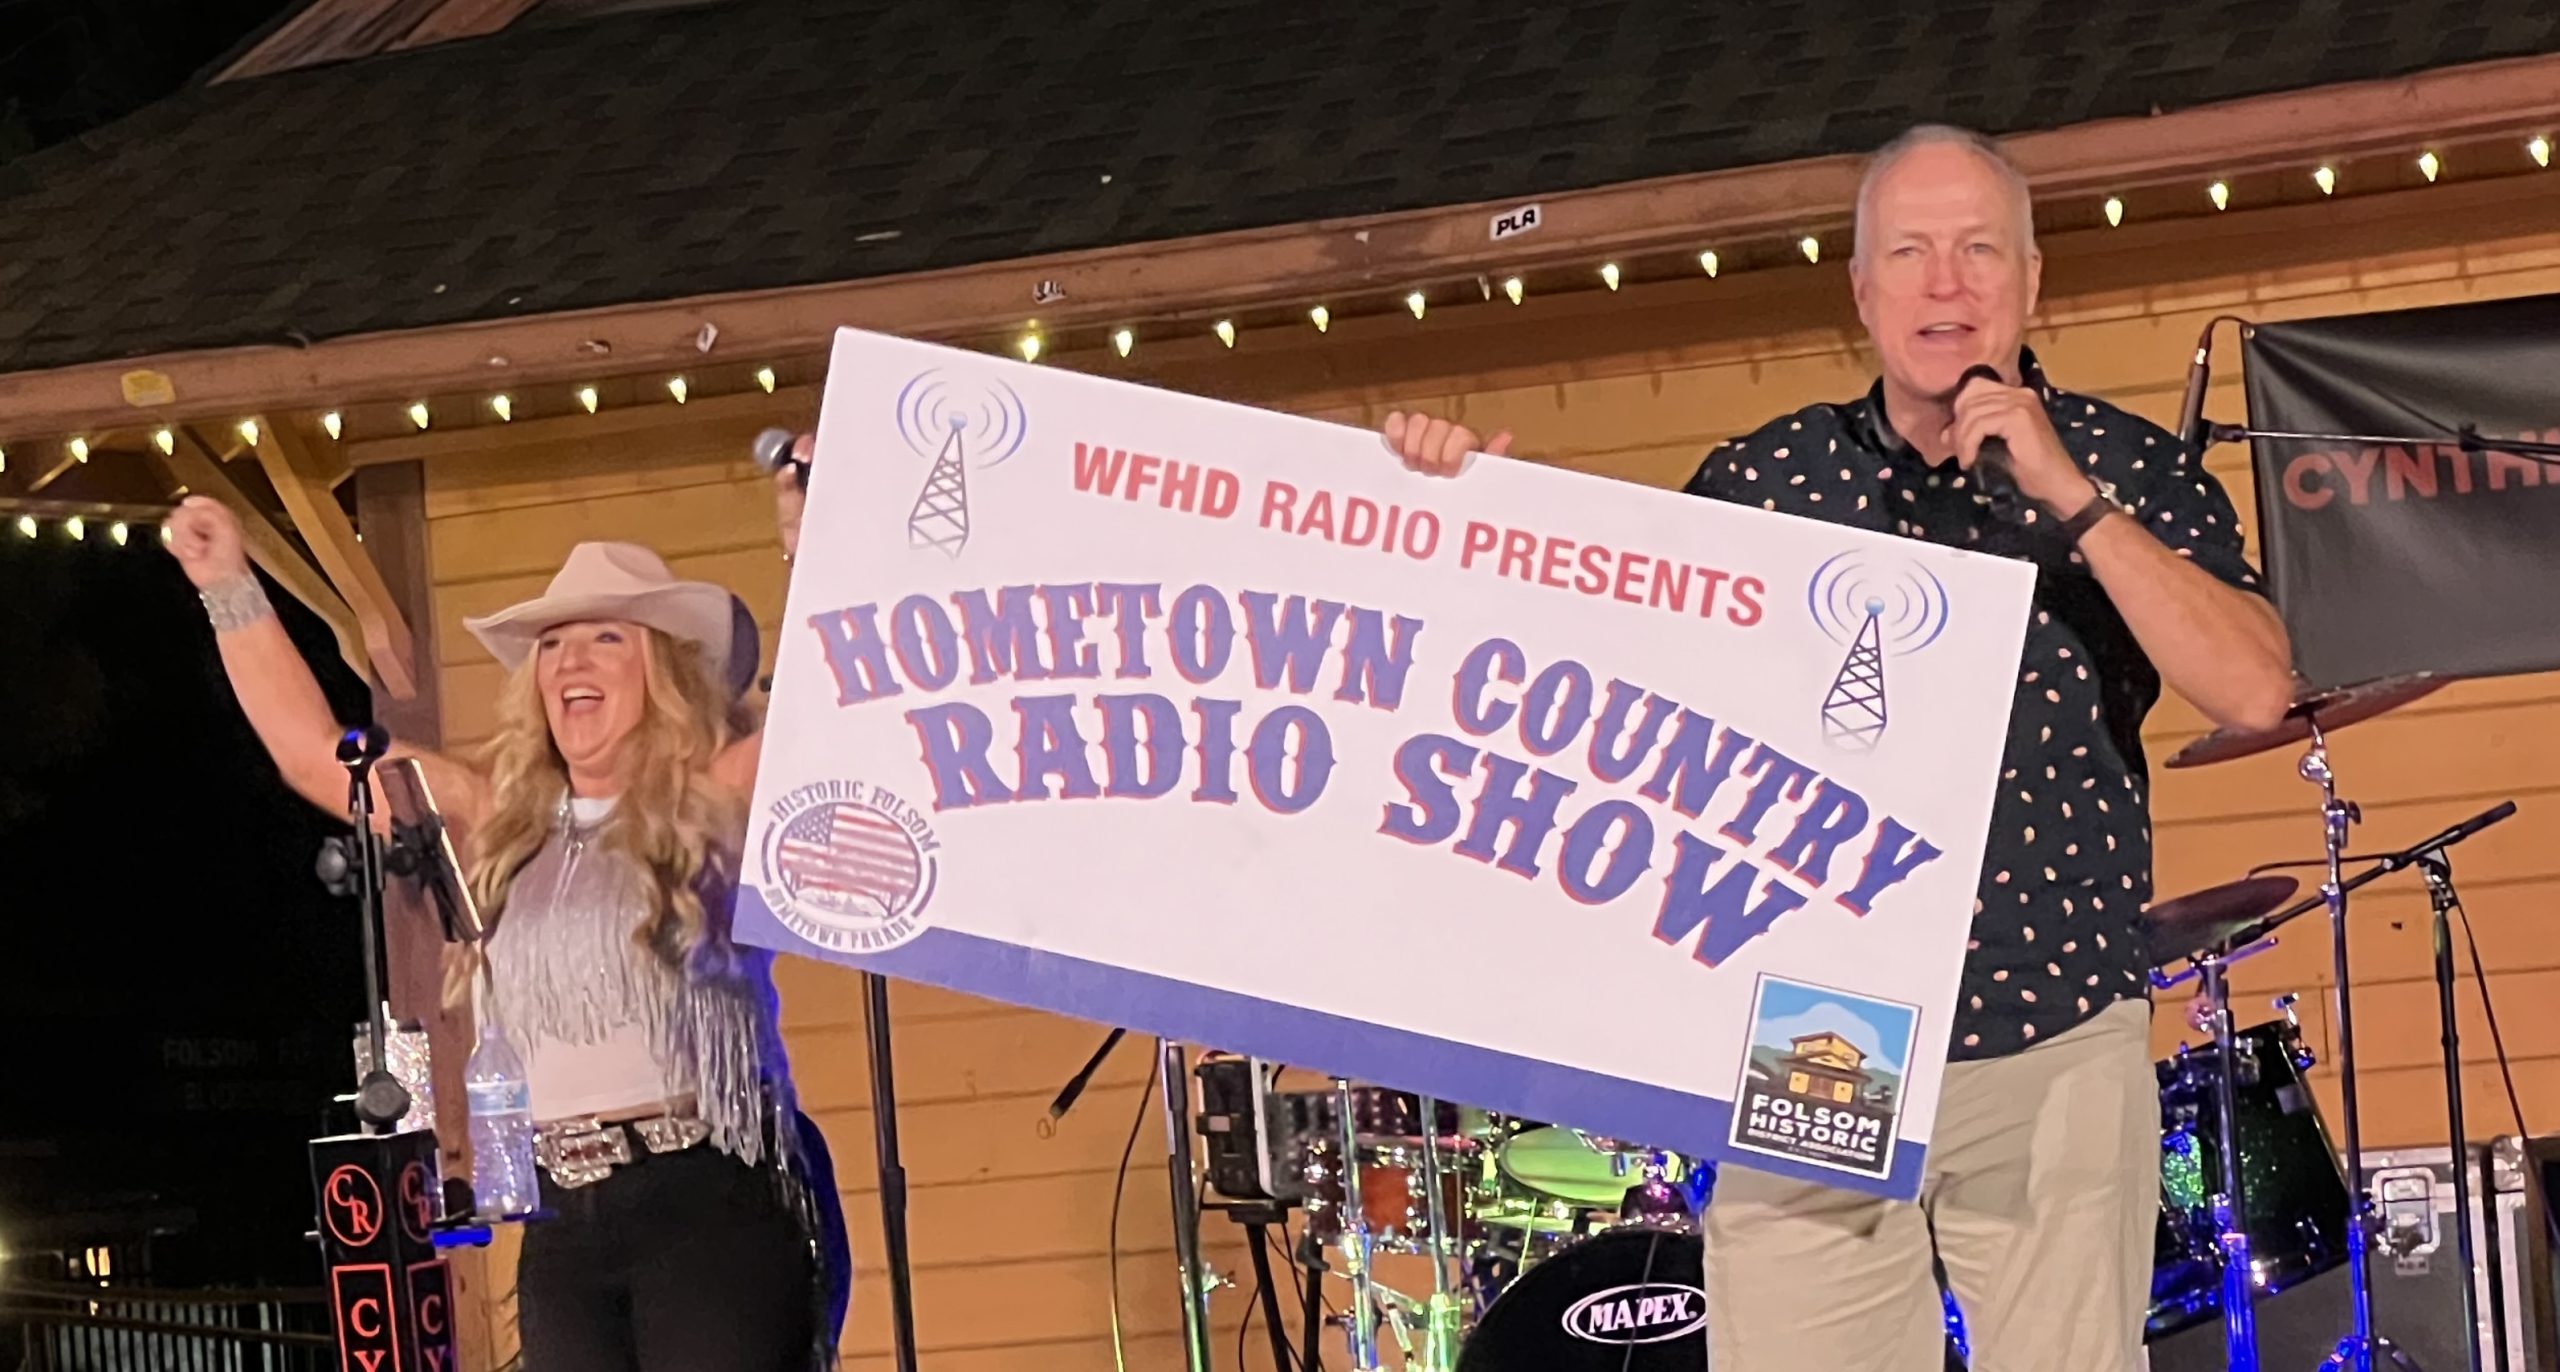 Hometown Country Radio Show returns to Historic Folsom Friday